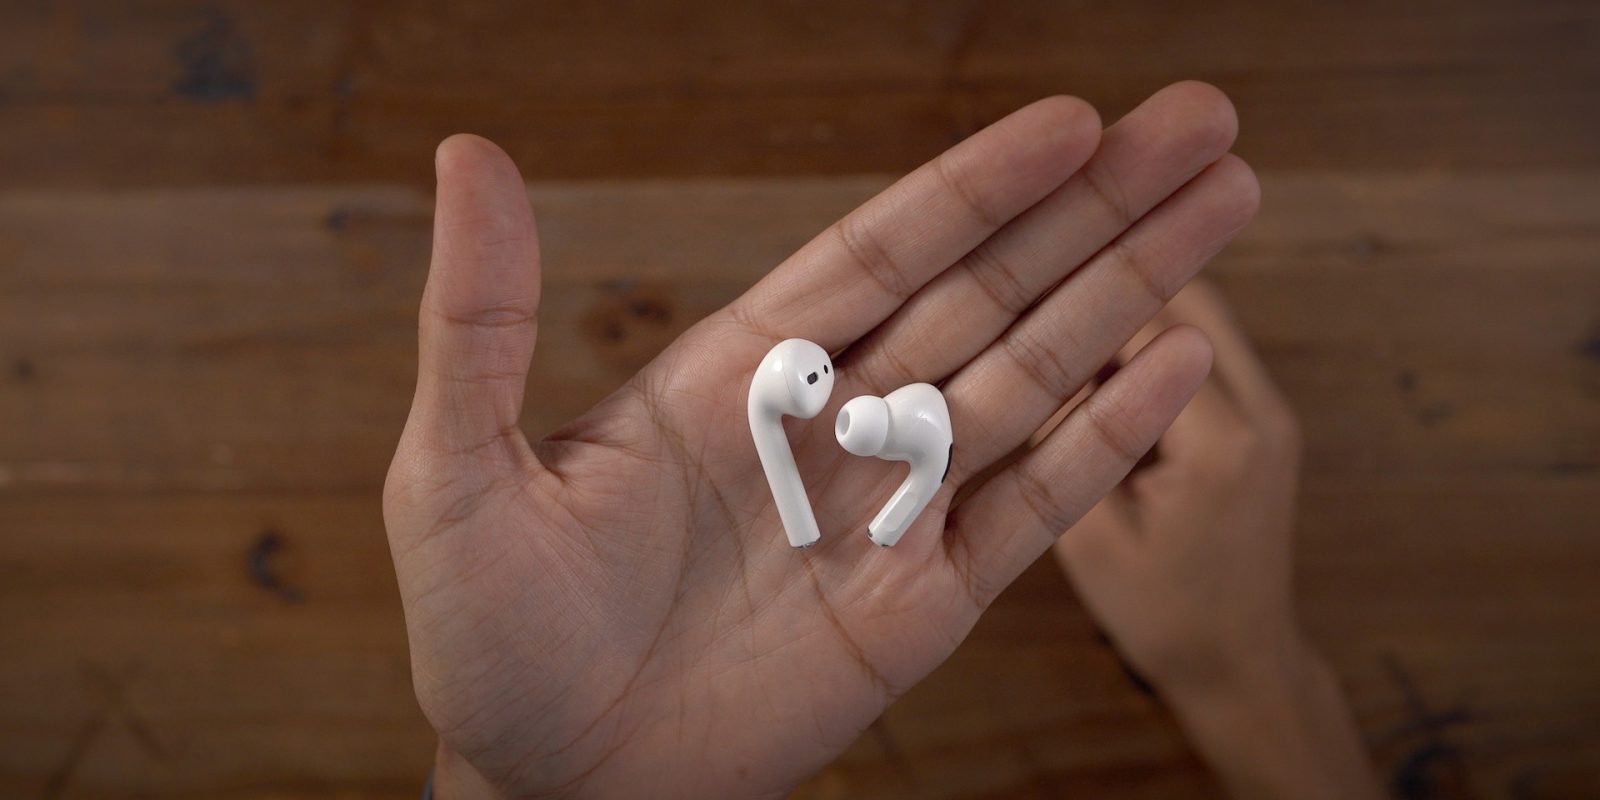 AirPods Pro deal hits $235, 15" MacBook Pro $300 off, more - 9to5Mac